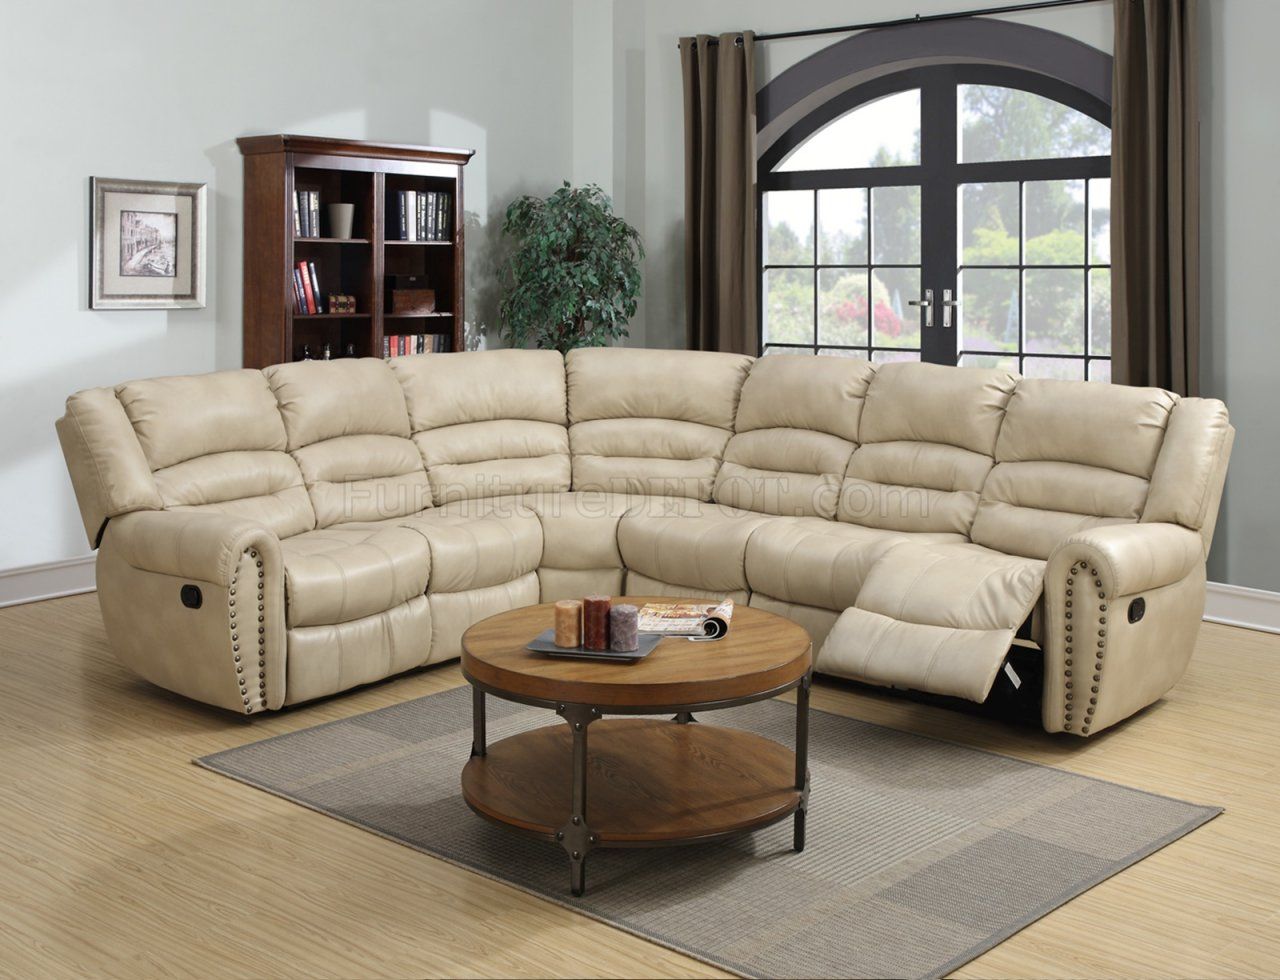 G687 Motion Sectional Sofa In Beige Bonded Leatherglory Regarding Beige L Shaped Sectional Sofas (Gallery 19 of 20)